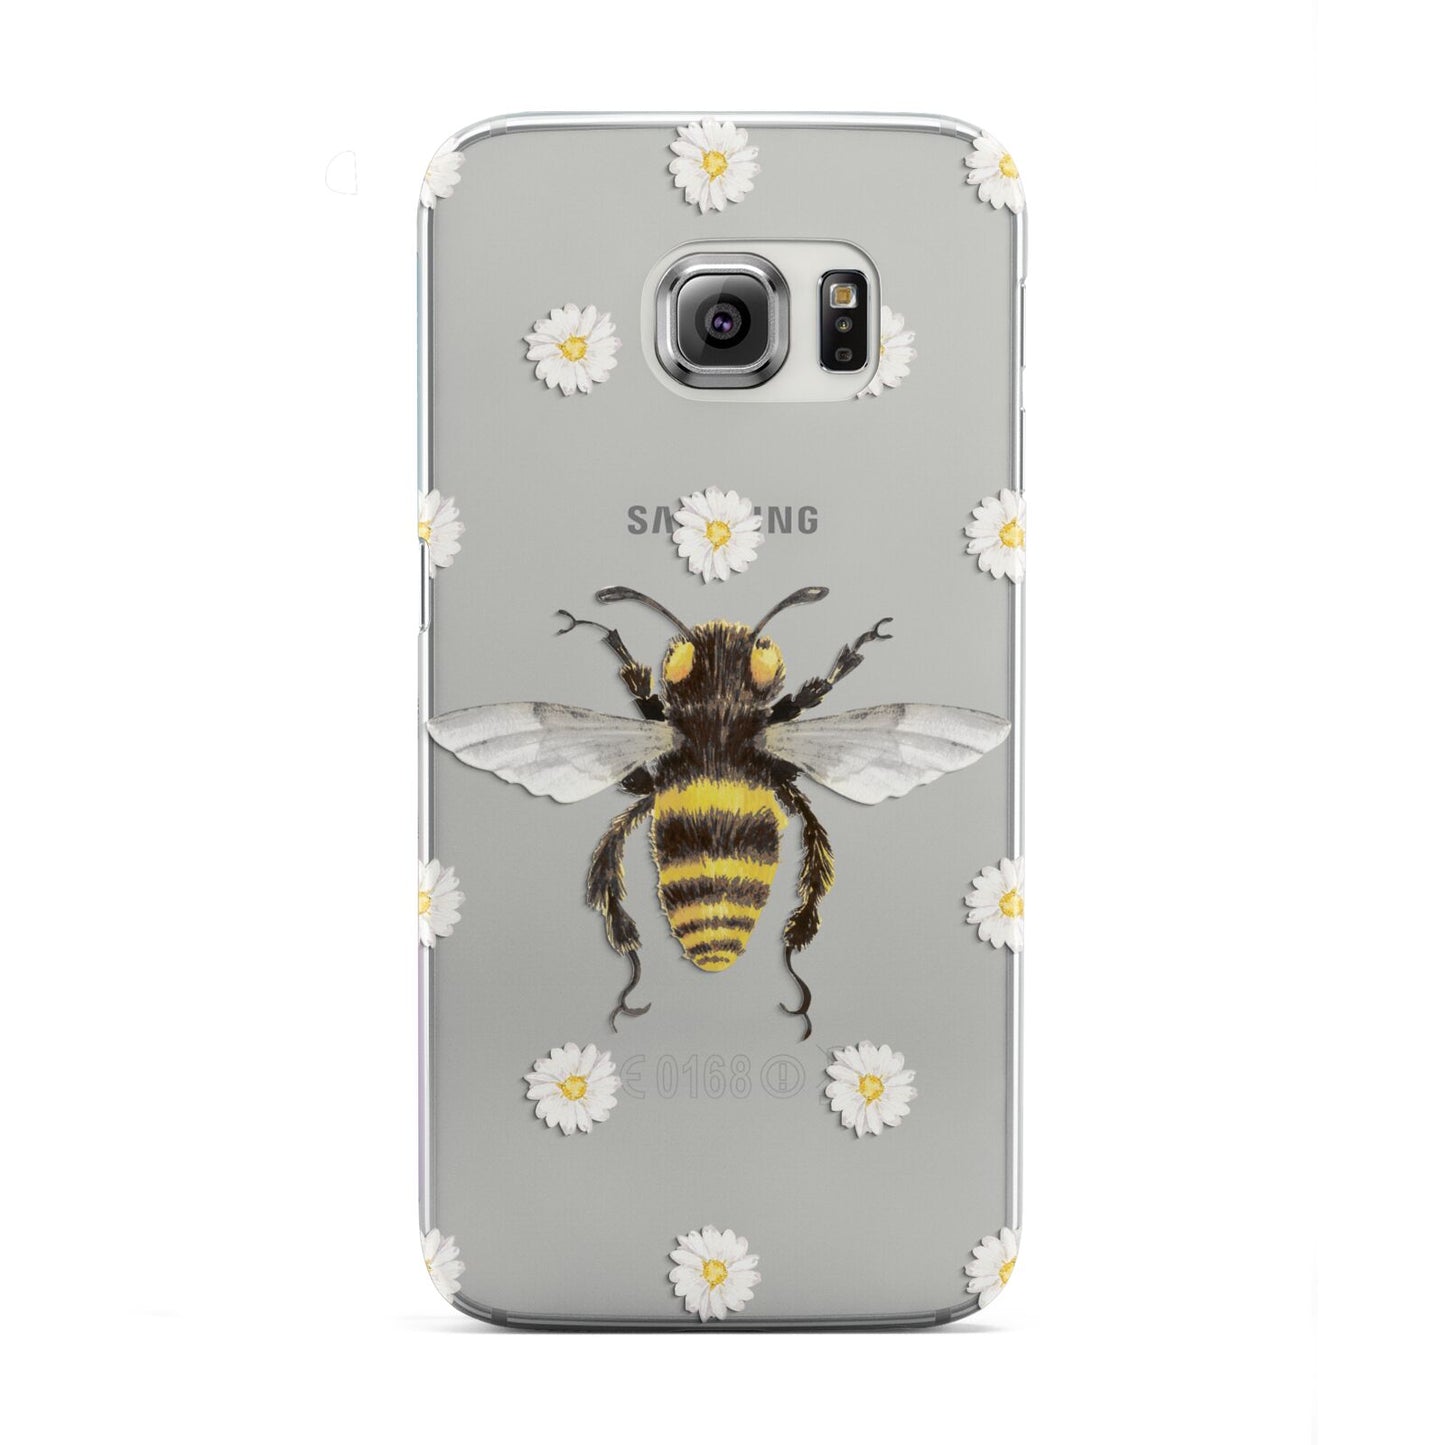 Bee Illustration with Daisies Samsung Galaxy S6 Edge Case